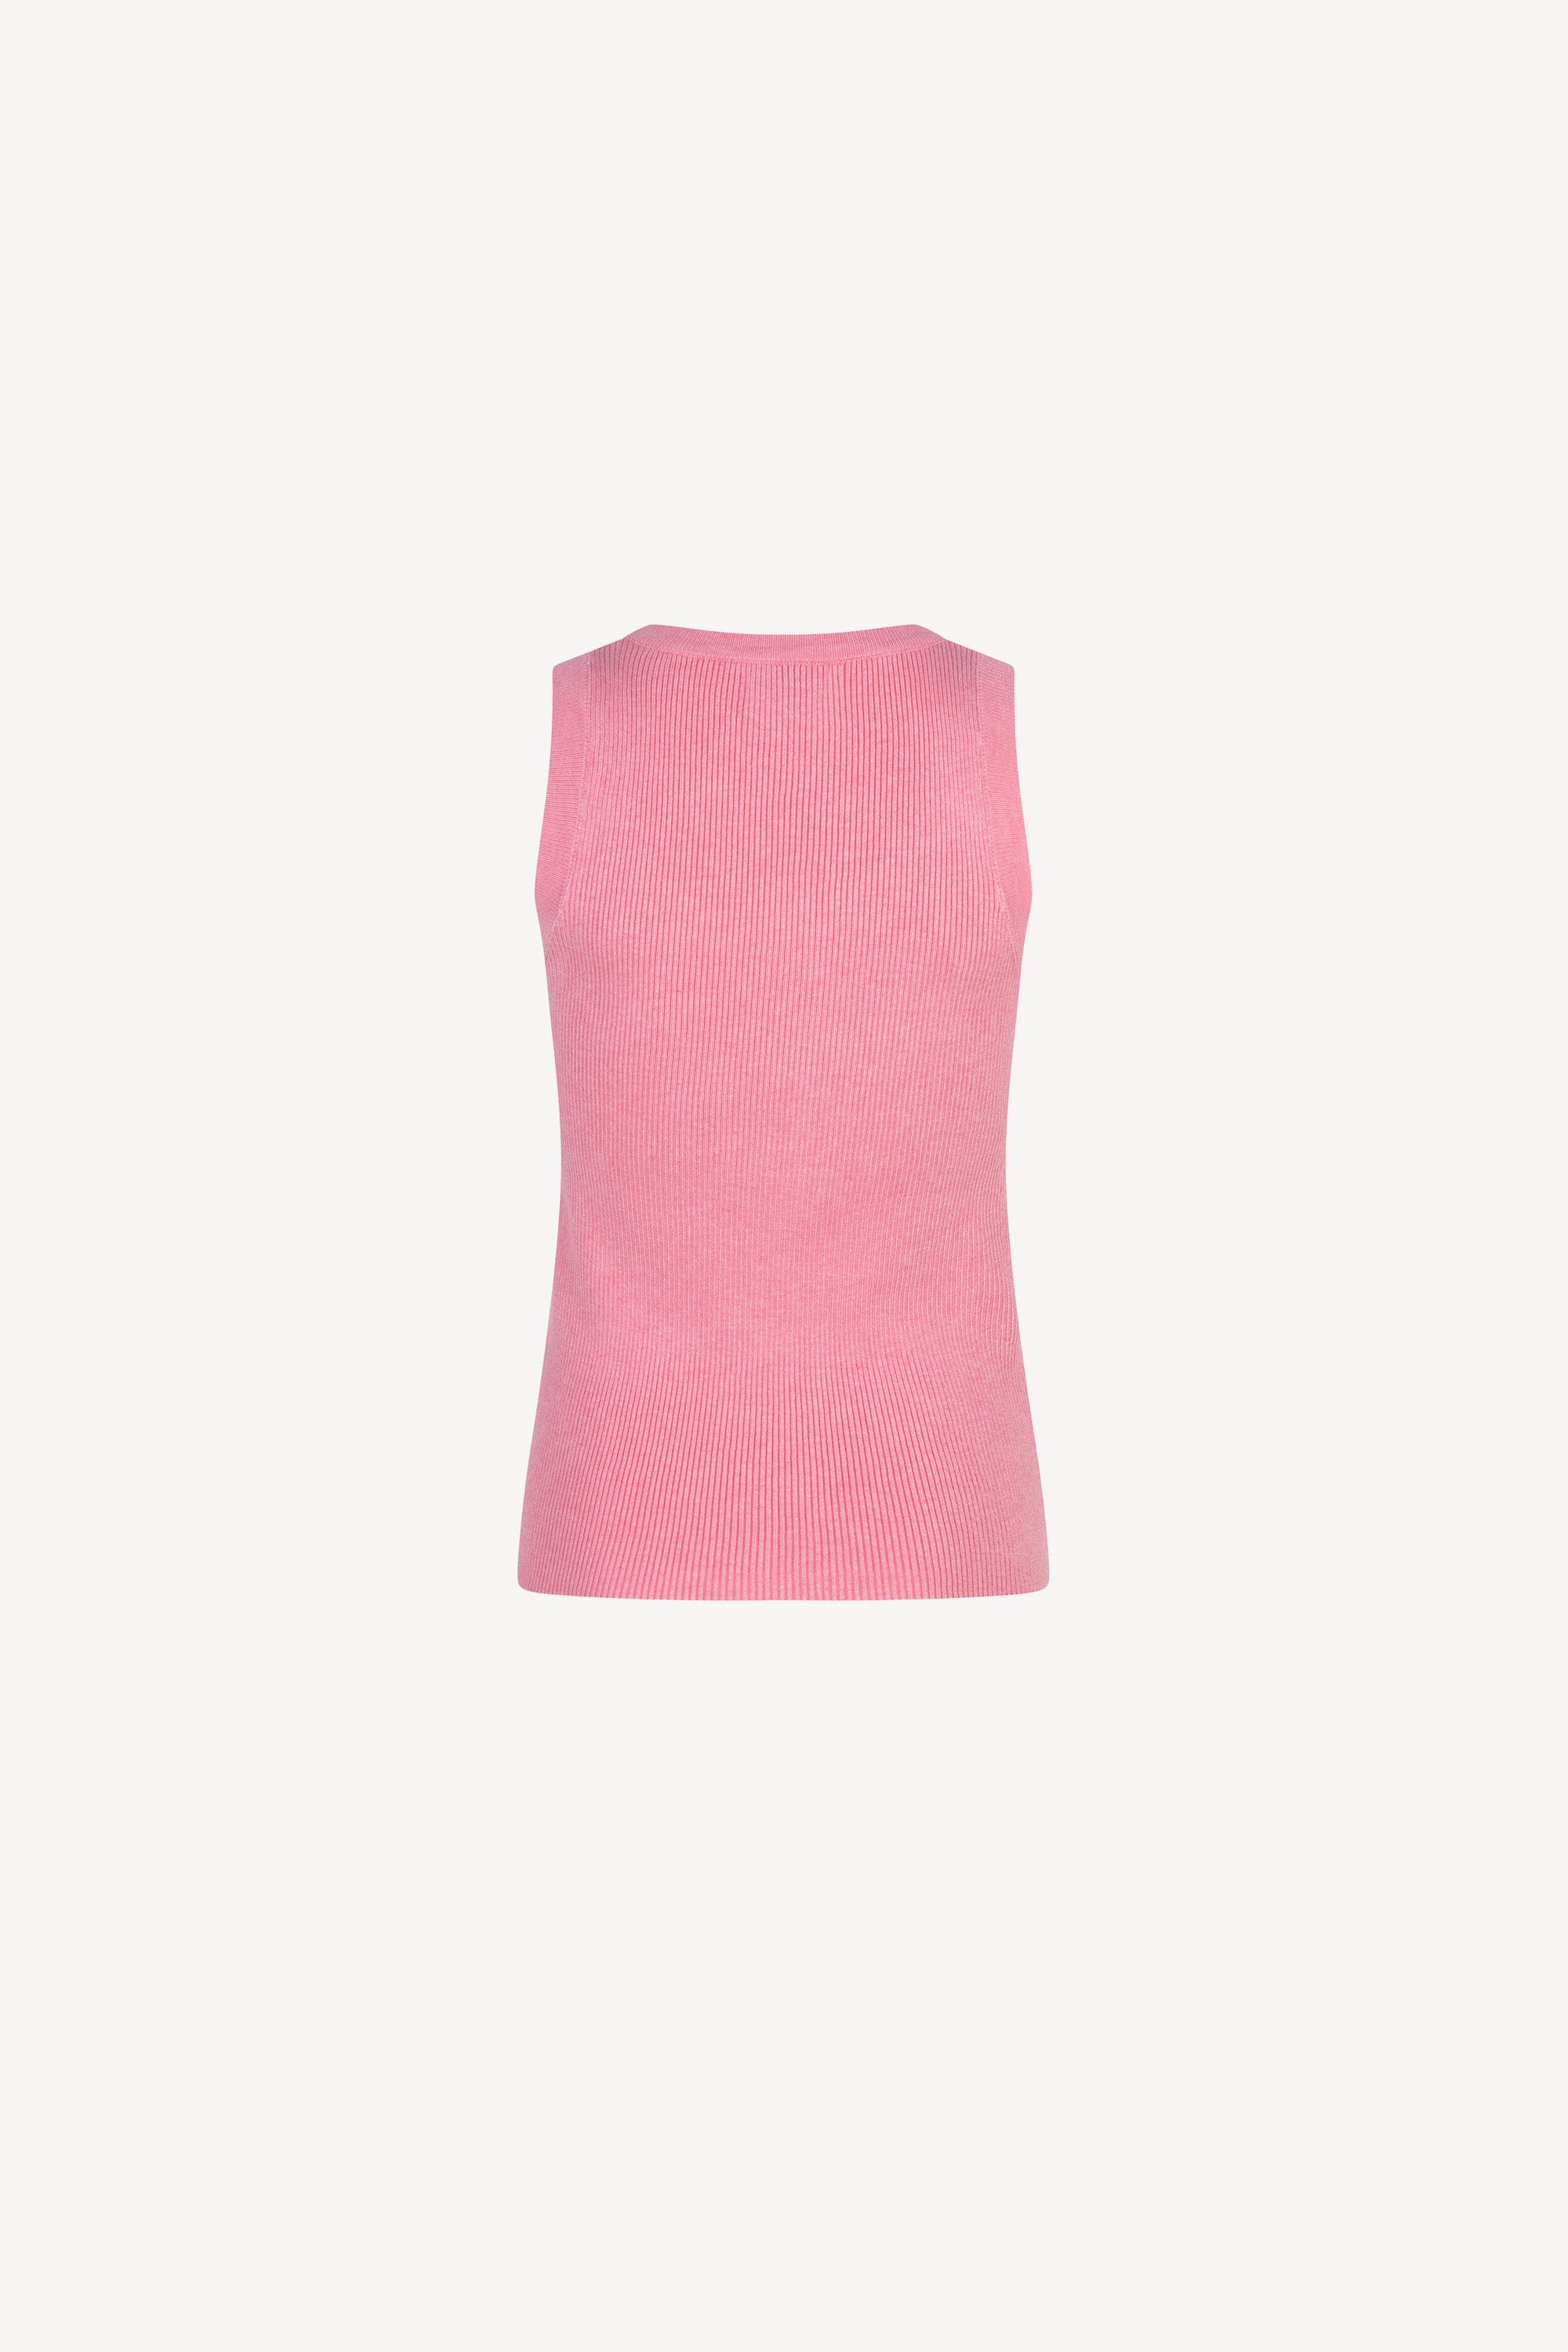 Keely Knitted Top Pink